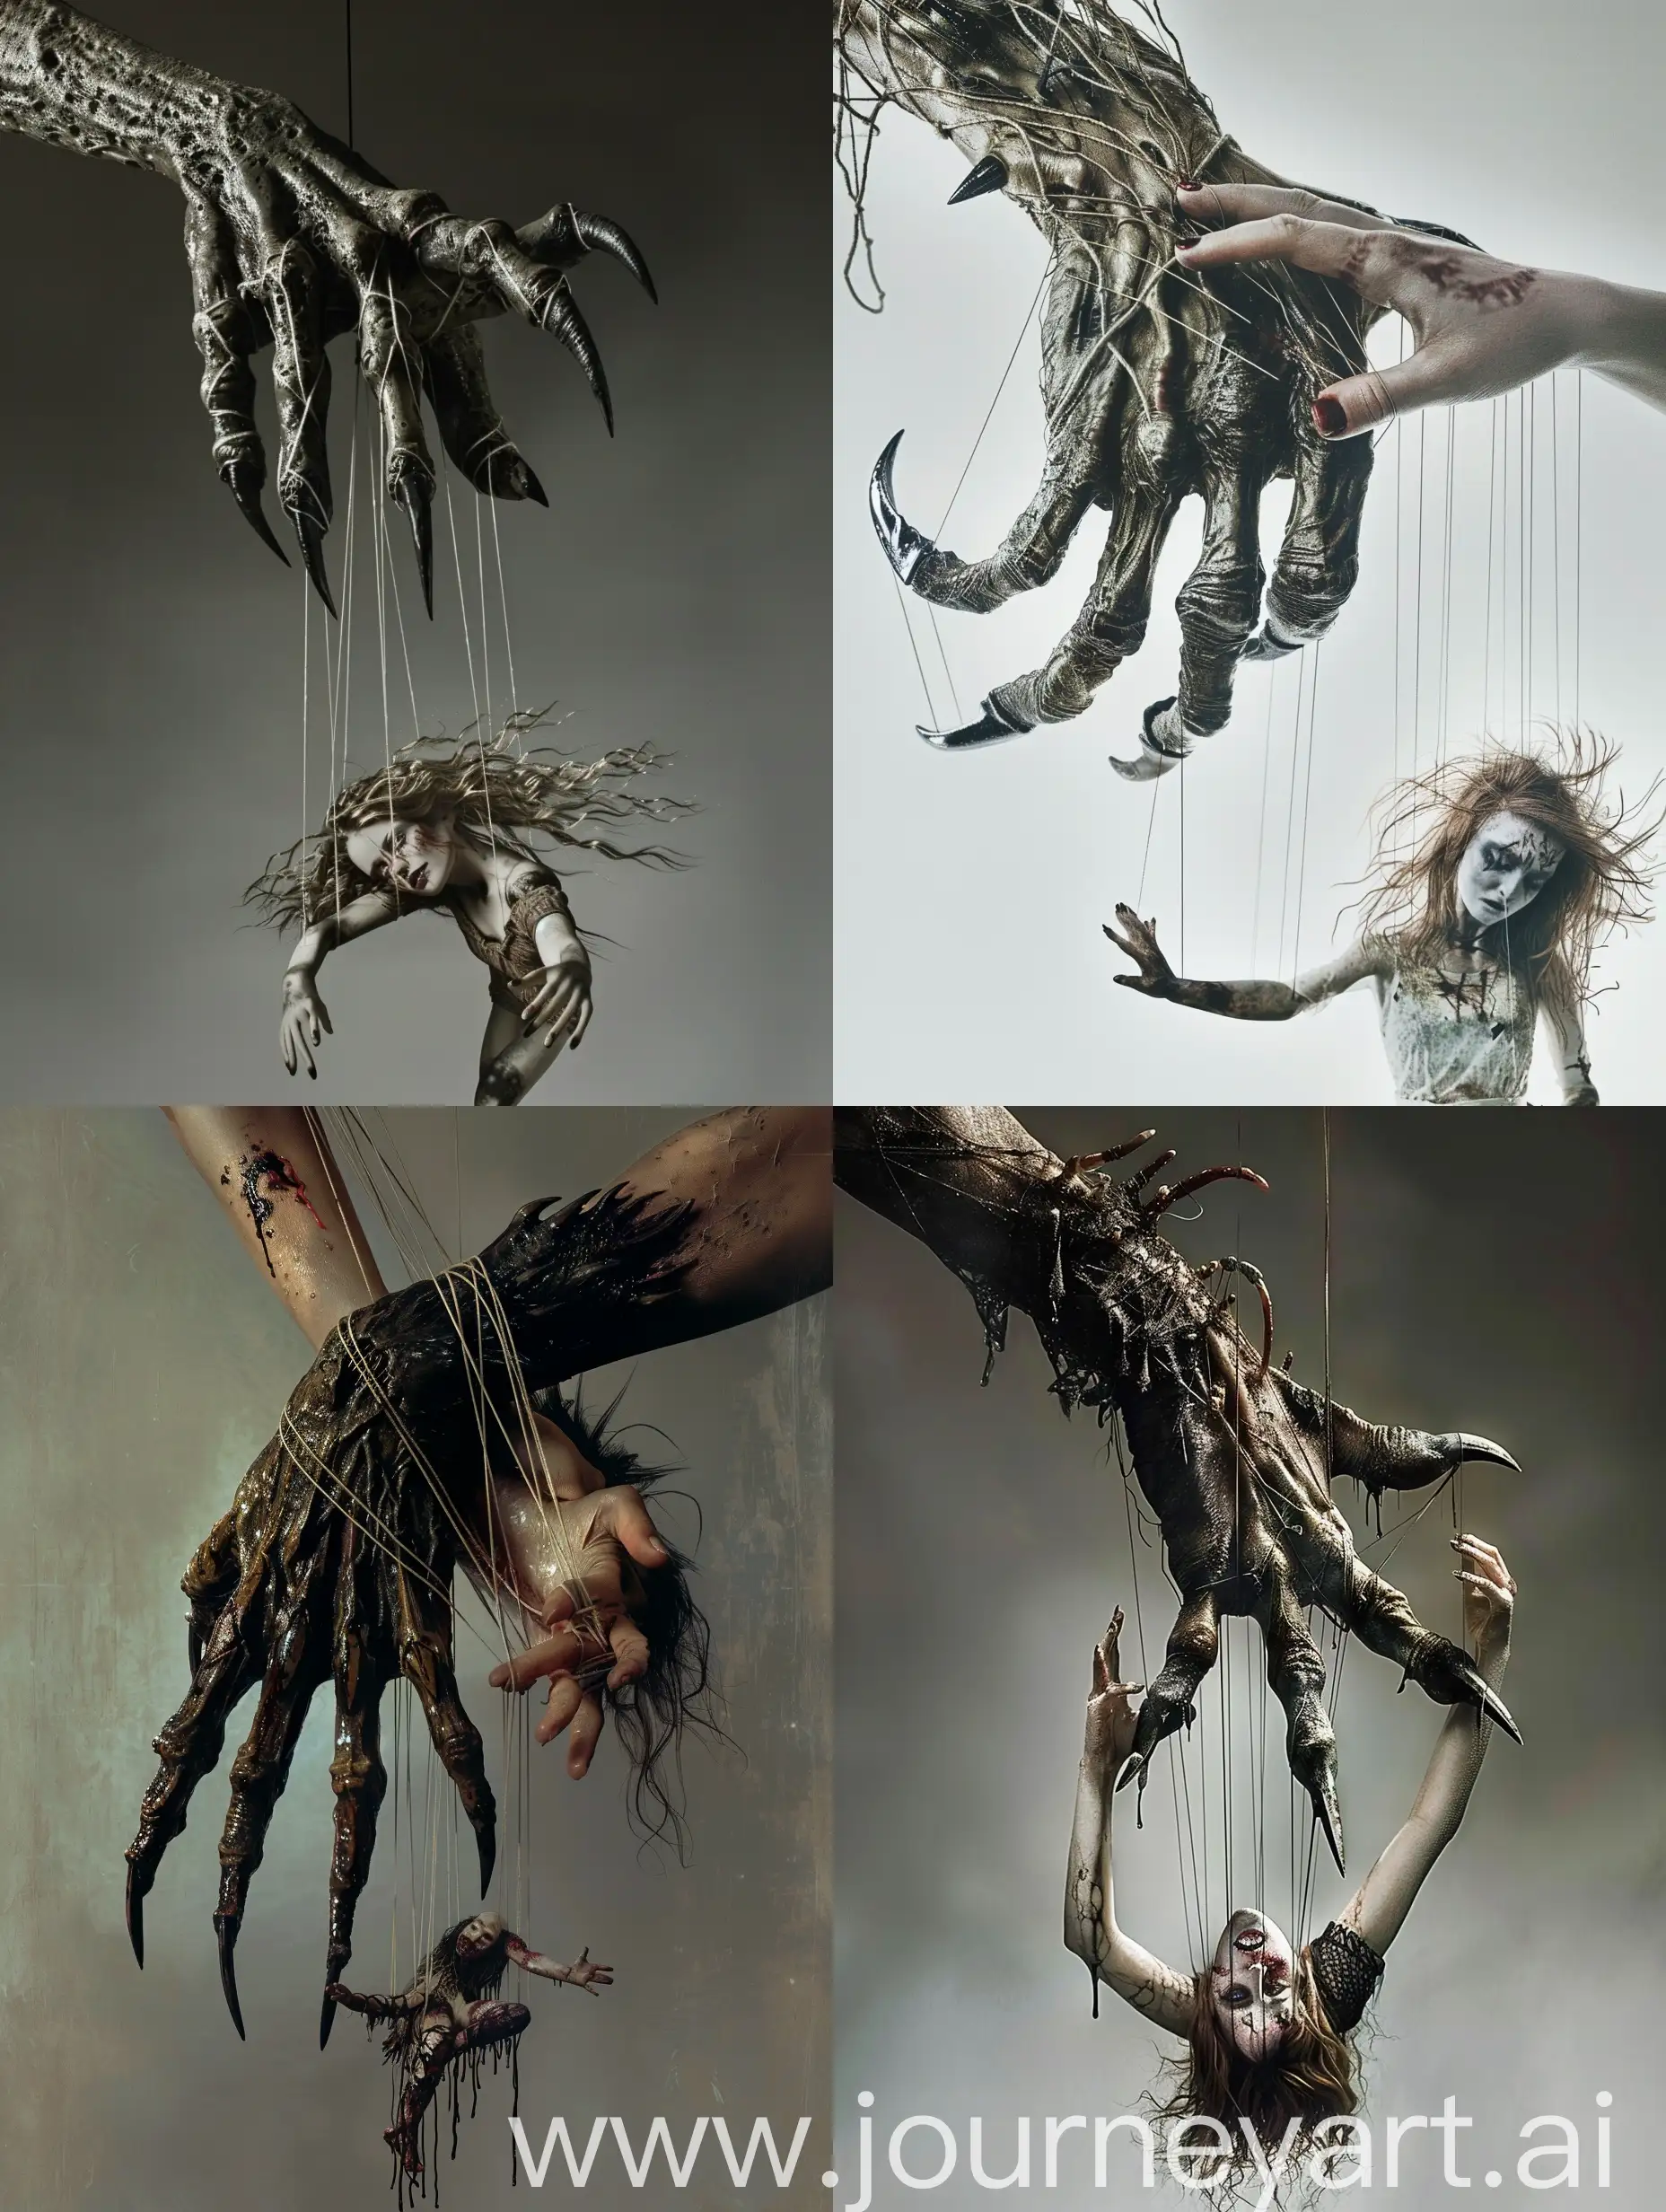 Capture a visually striking image that showcases the surreal and unsettling concept of a large demon-like hand with razor-sharp claws, its fingers intricately tied with puppet strings. Suspended below the hand, a beautiful yet unhinged woman, her arms and legs attached to the puppet strings, transforming her into a marionette. The woman's appearance is disheveled, with wild, messy hair and makeup smeared across her face, accentuating her psychotic expression and conveying a sense of madness and instability.